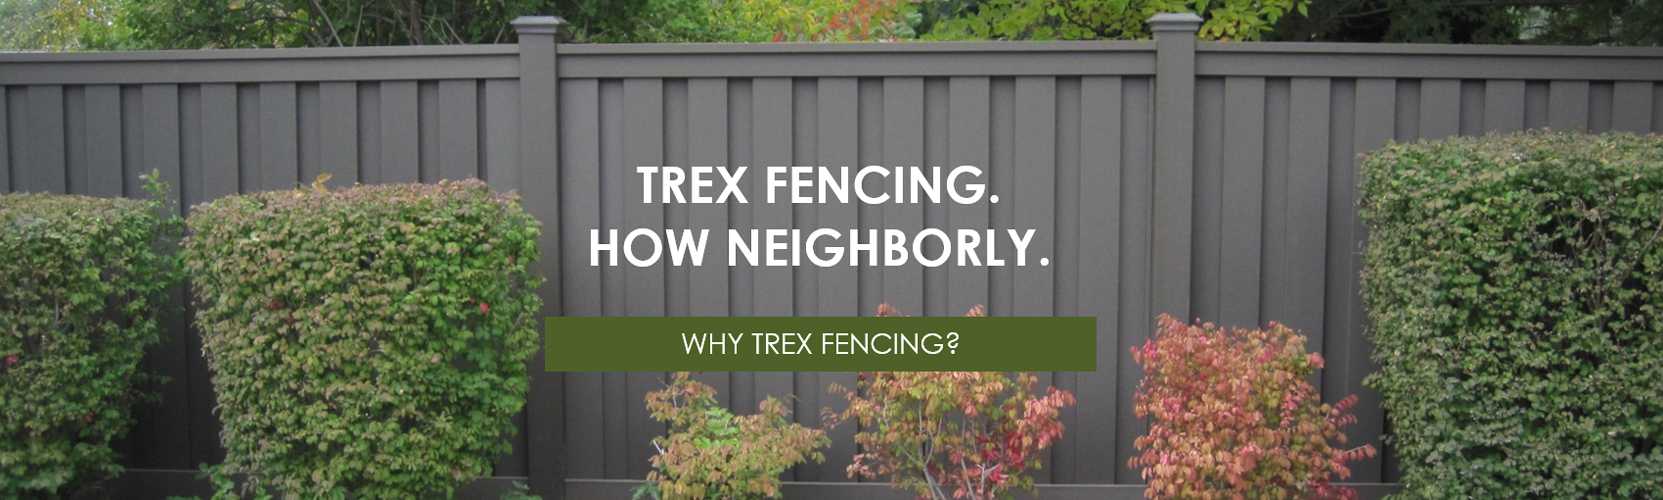 Trex Fencing, the Composite Alternative to Wood and Vinyl